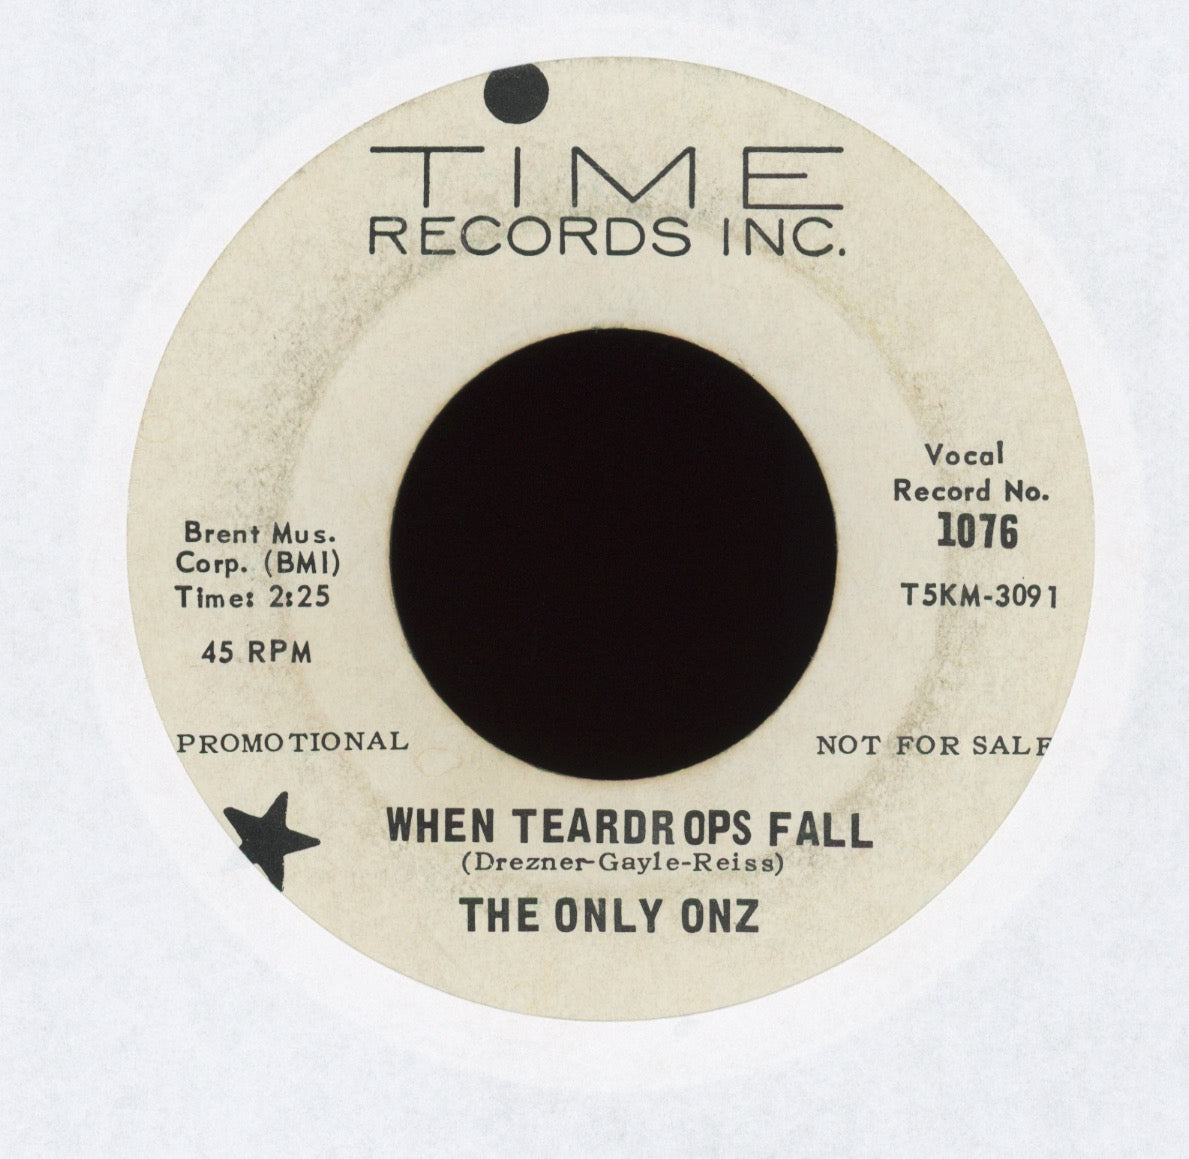 The Only Onz - When Teardrops Fall on Time Promo